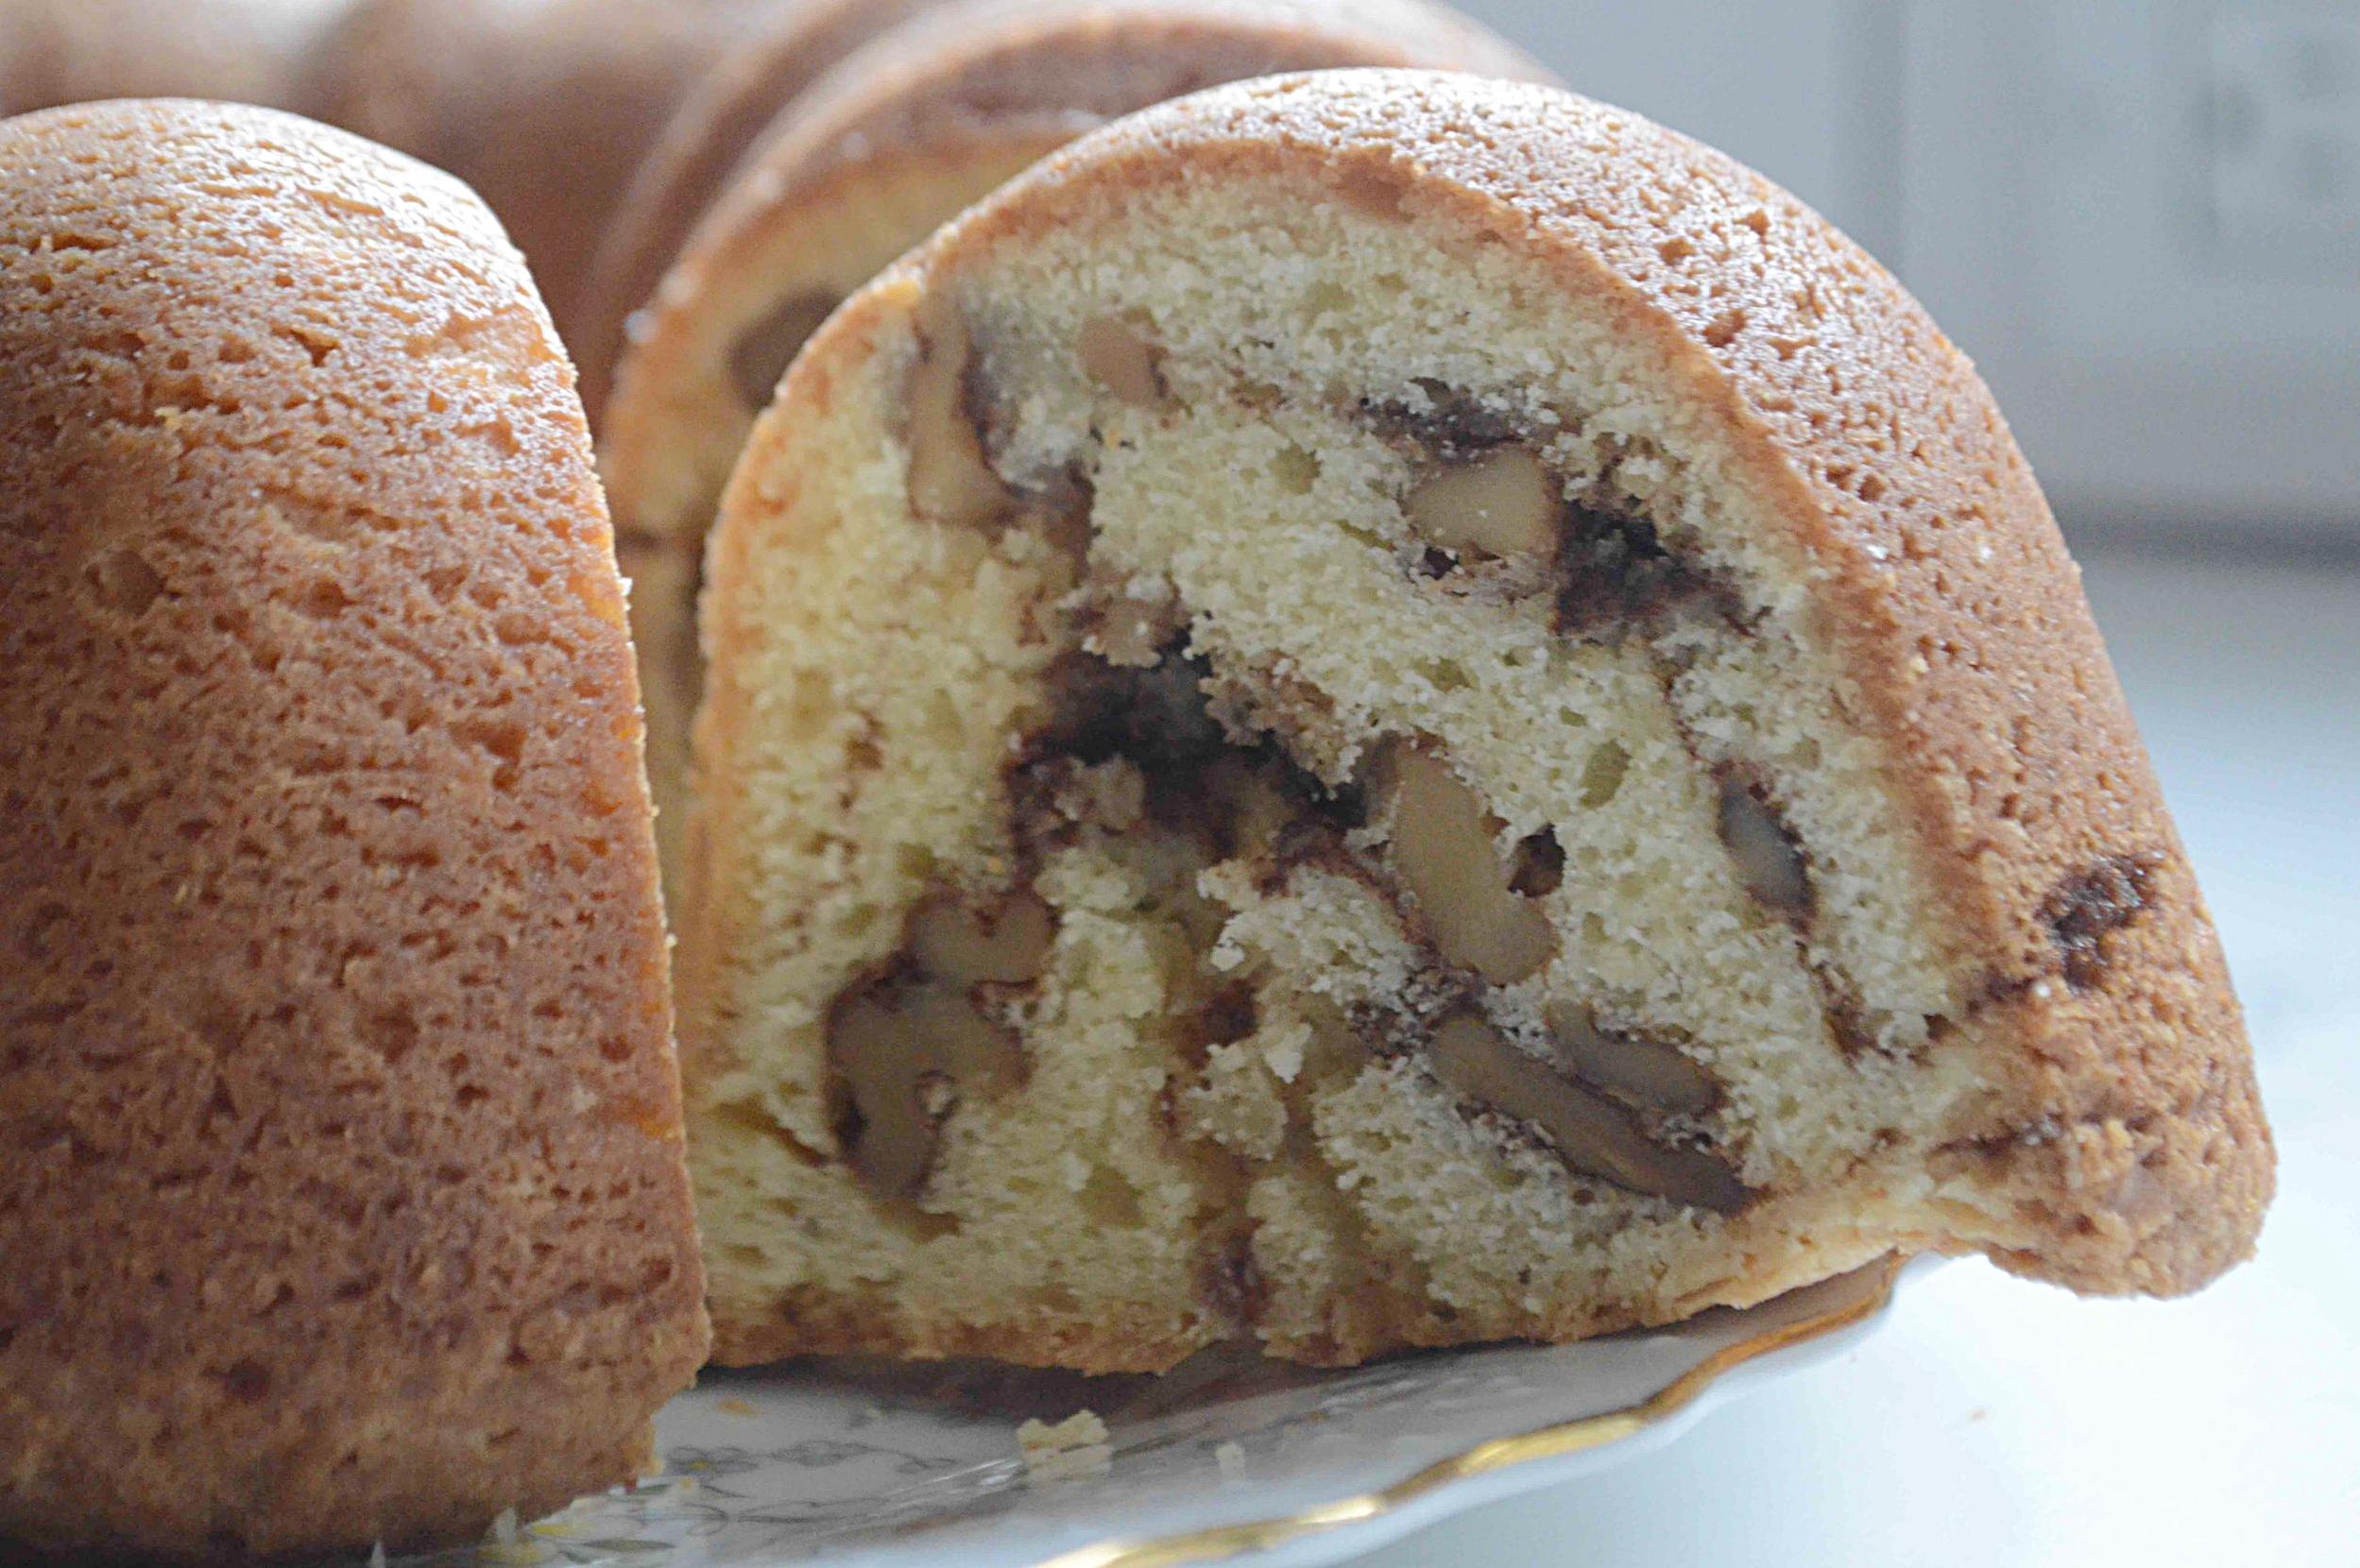  A slice of heaven with every bite - this coffee cake will not disappoint.